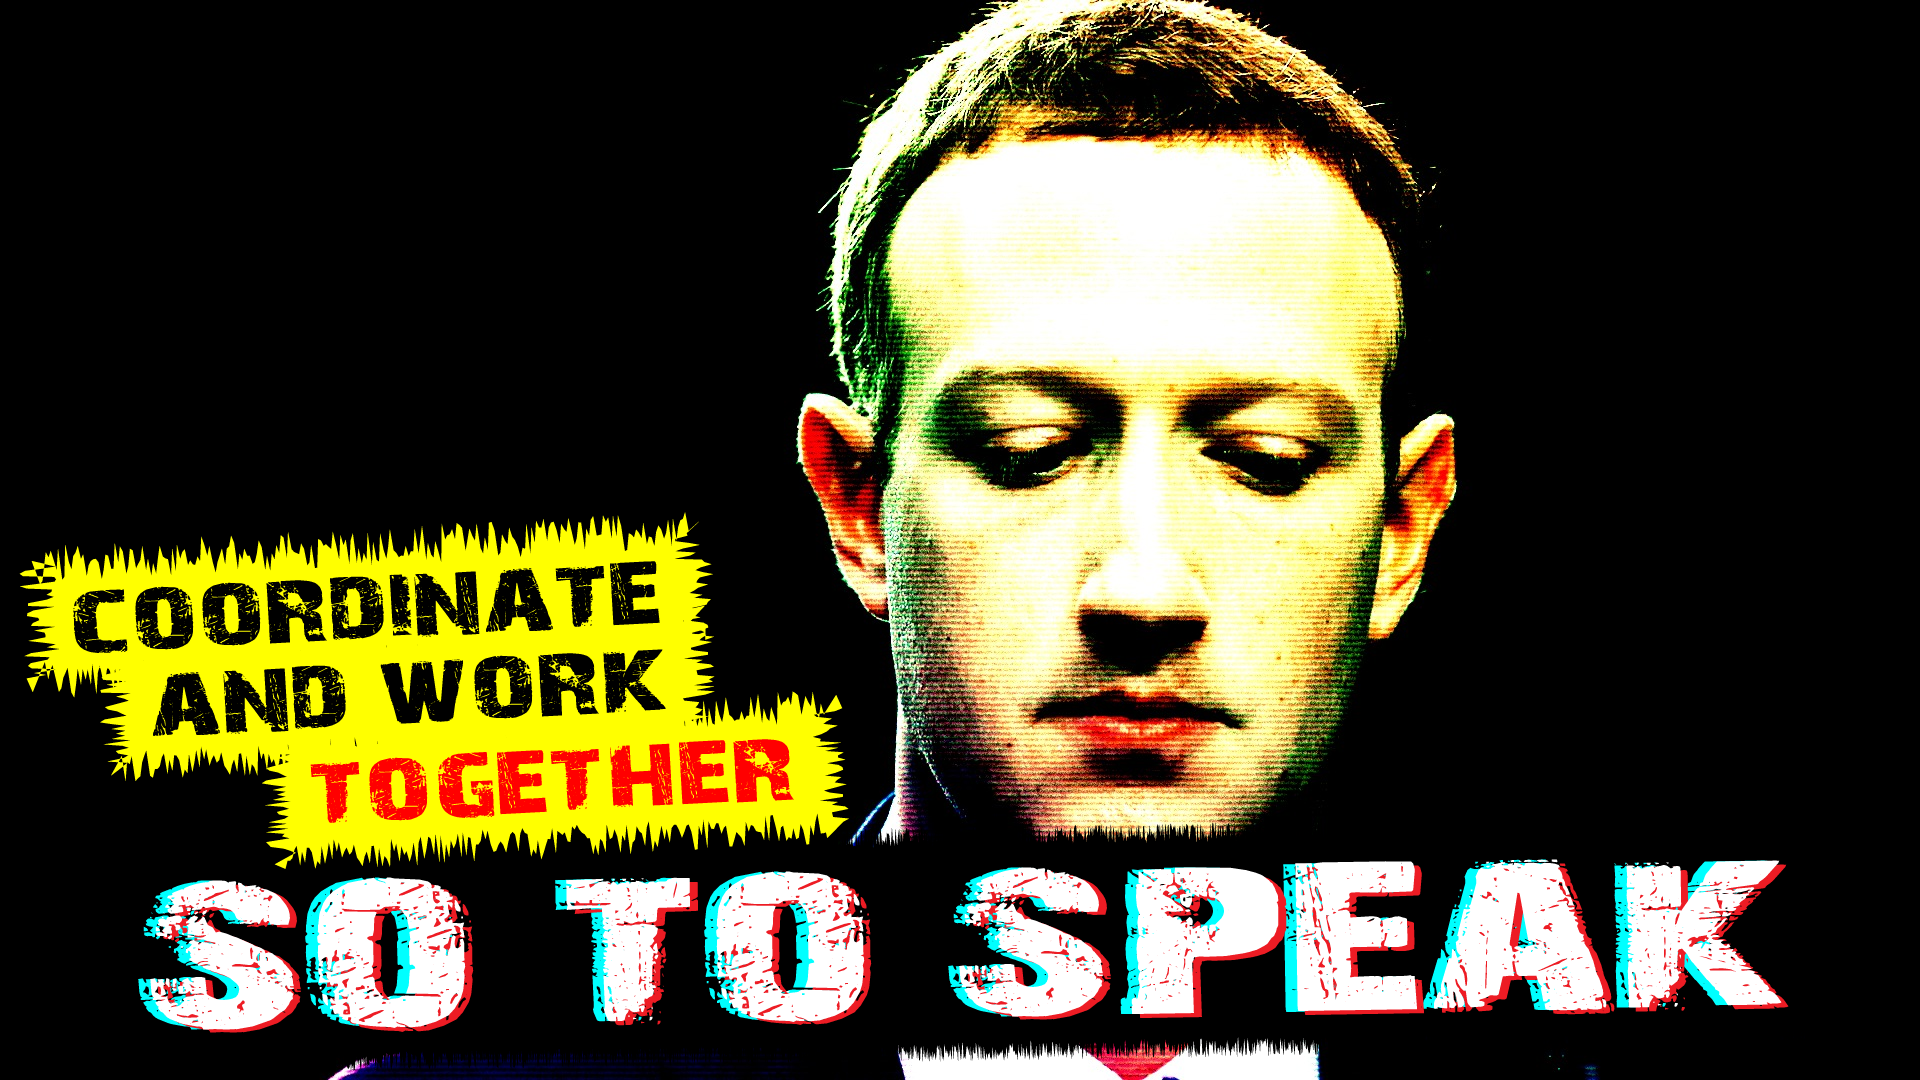 Zuckerberg plots world domination and argues that antitrust would be harmful to his colluding with other large companies to censor the goyim